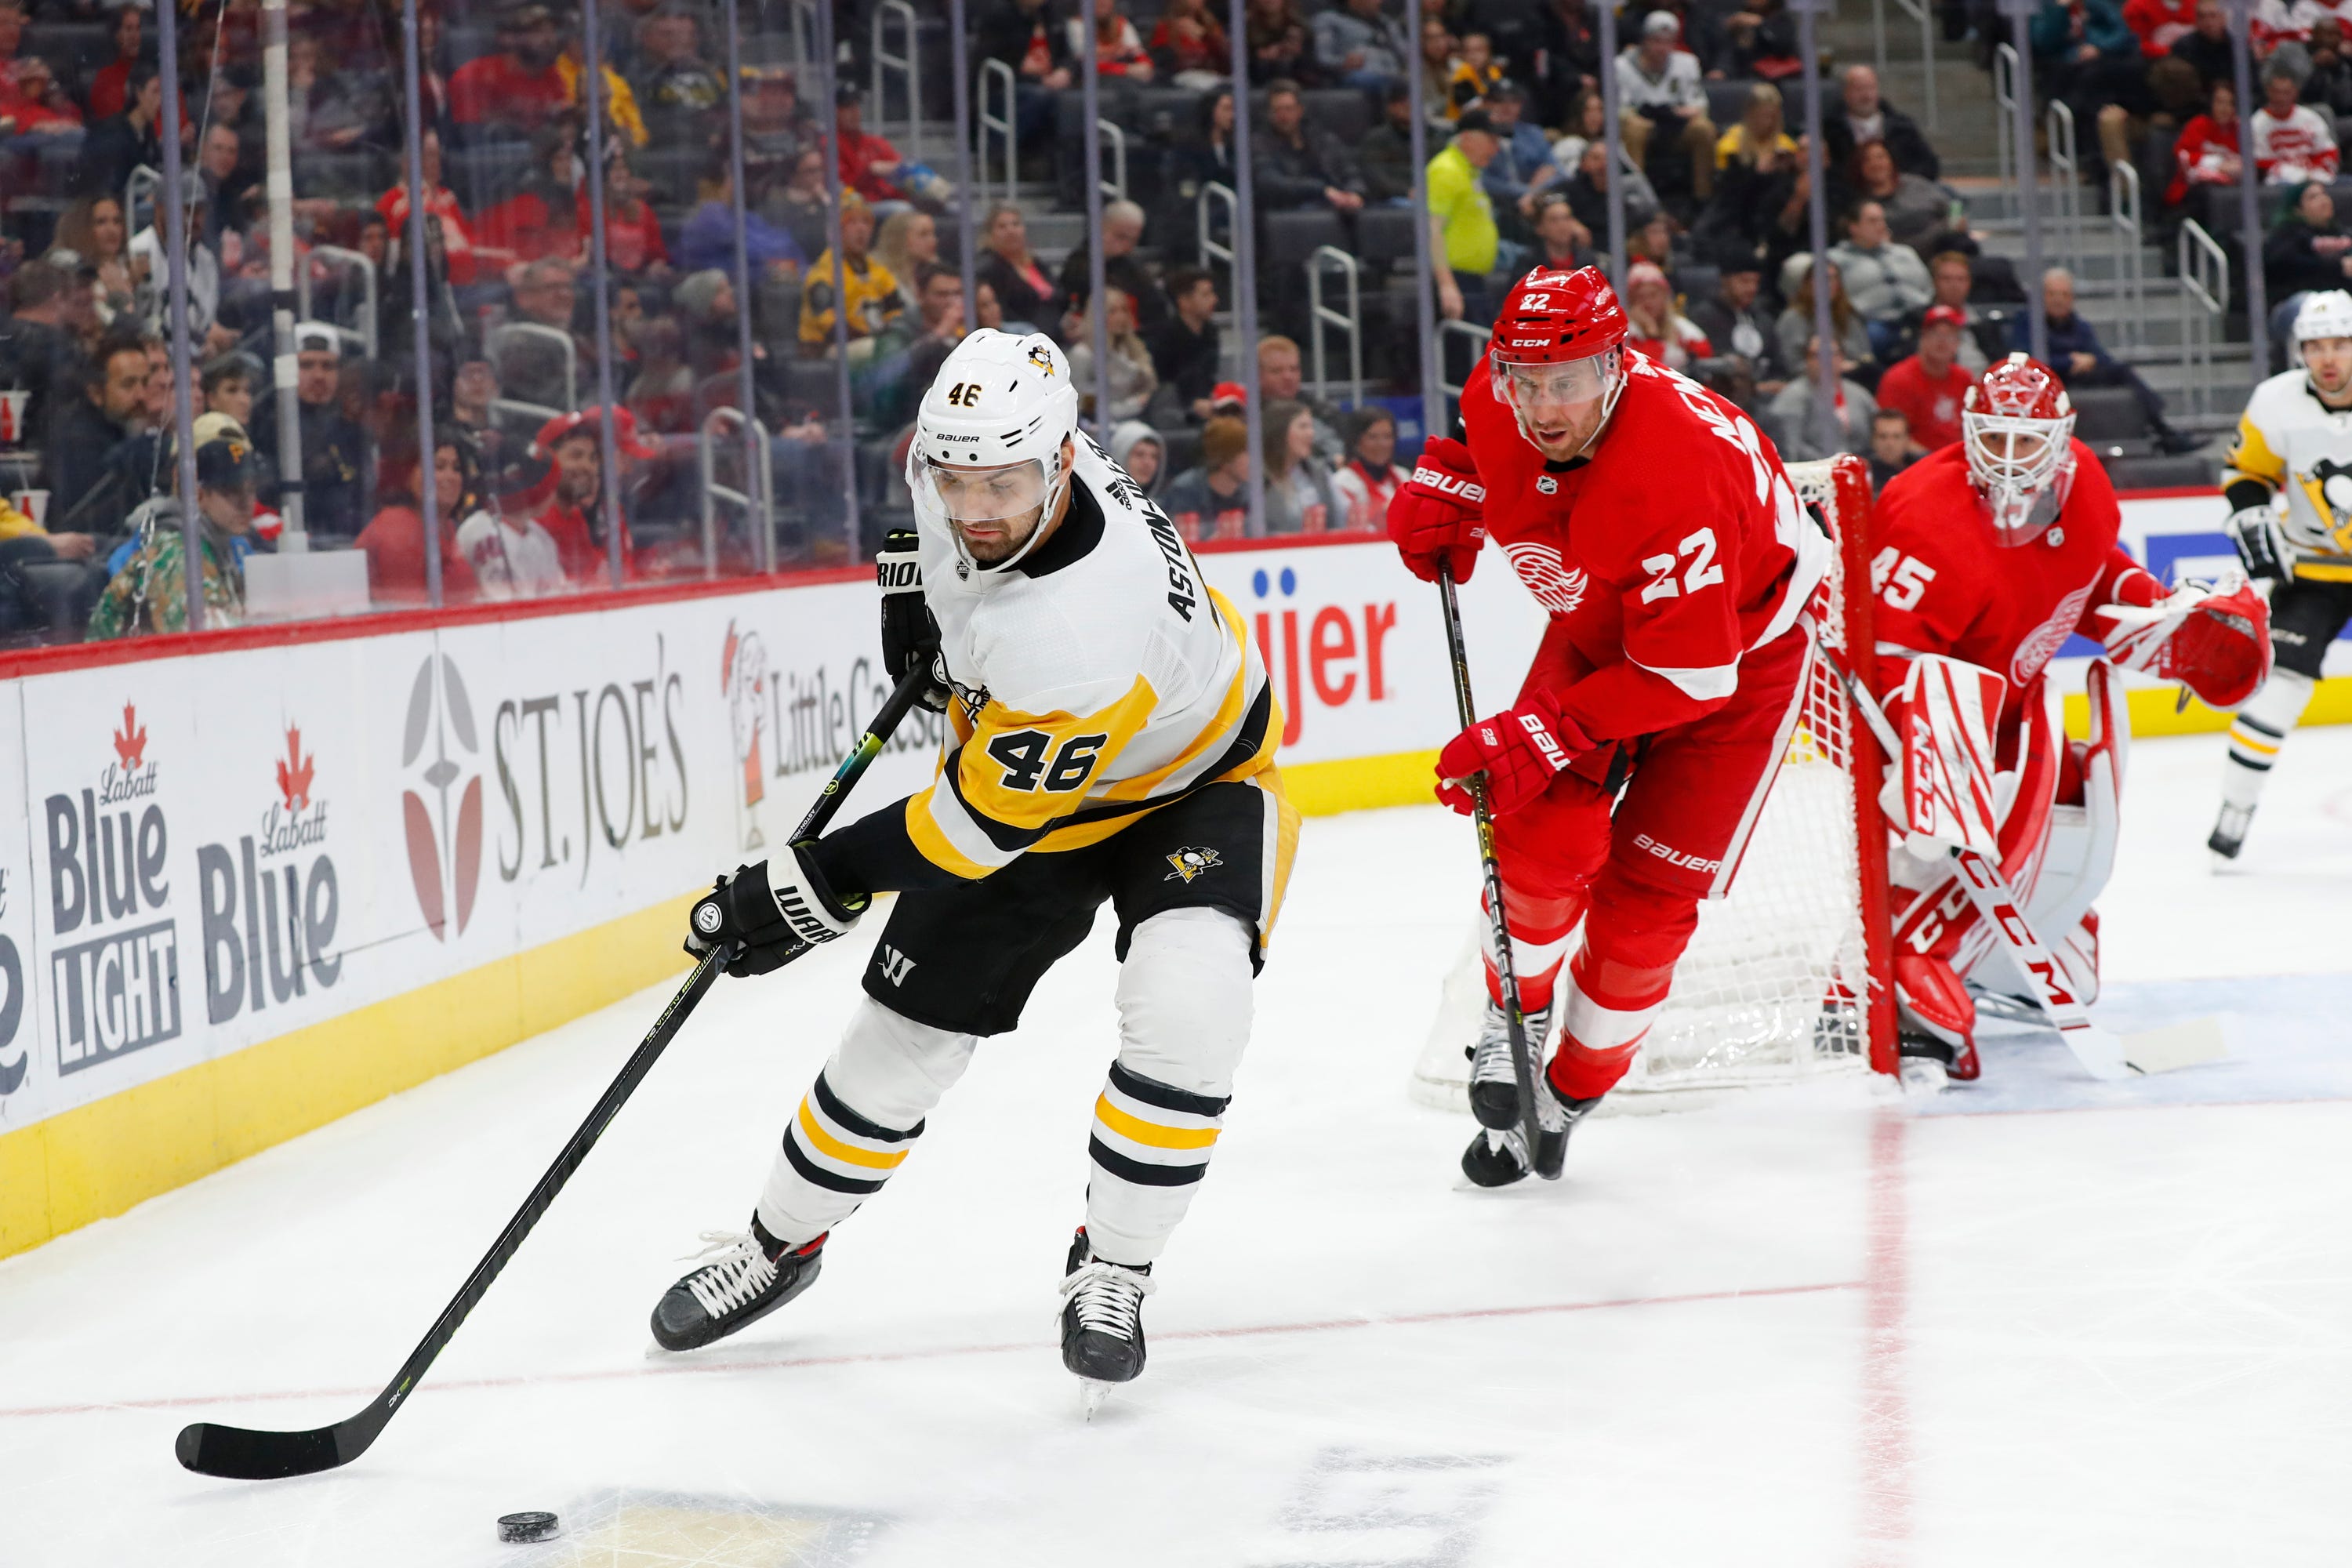 Pittsburgh Penguins center Zach Aston-Reese (46) collects the puck against the Detroit Red Wings in the first period.